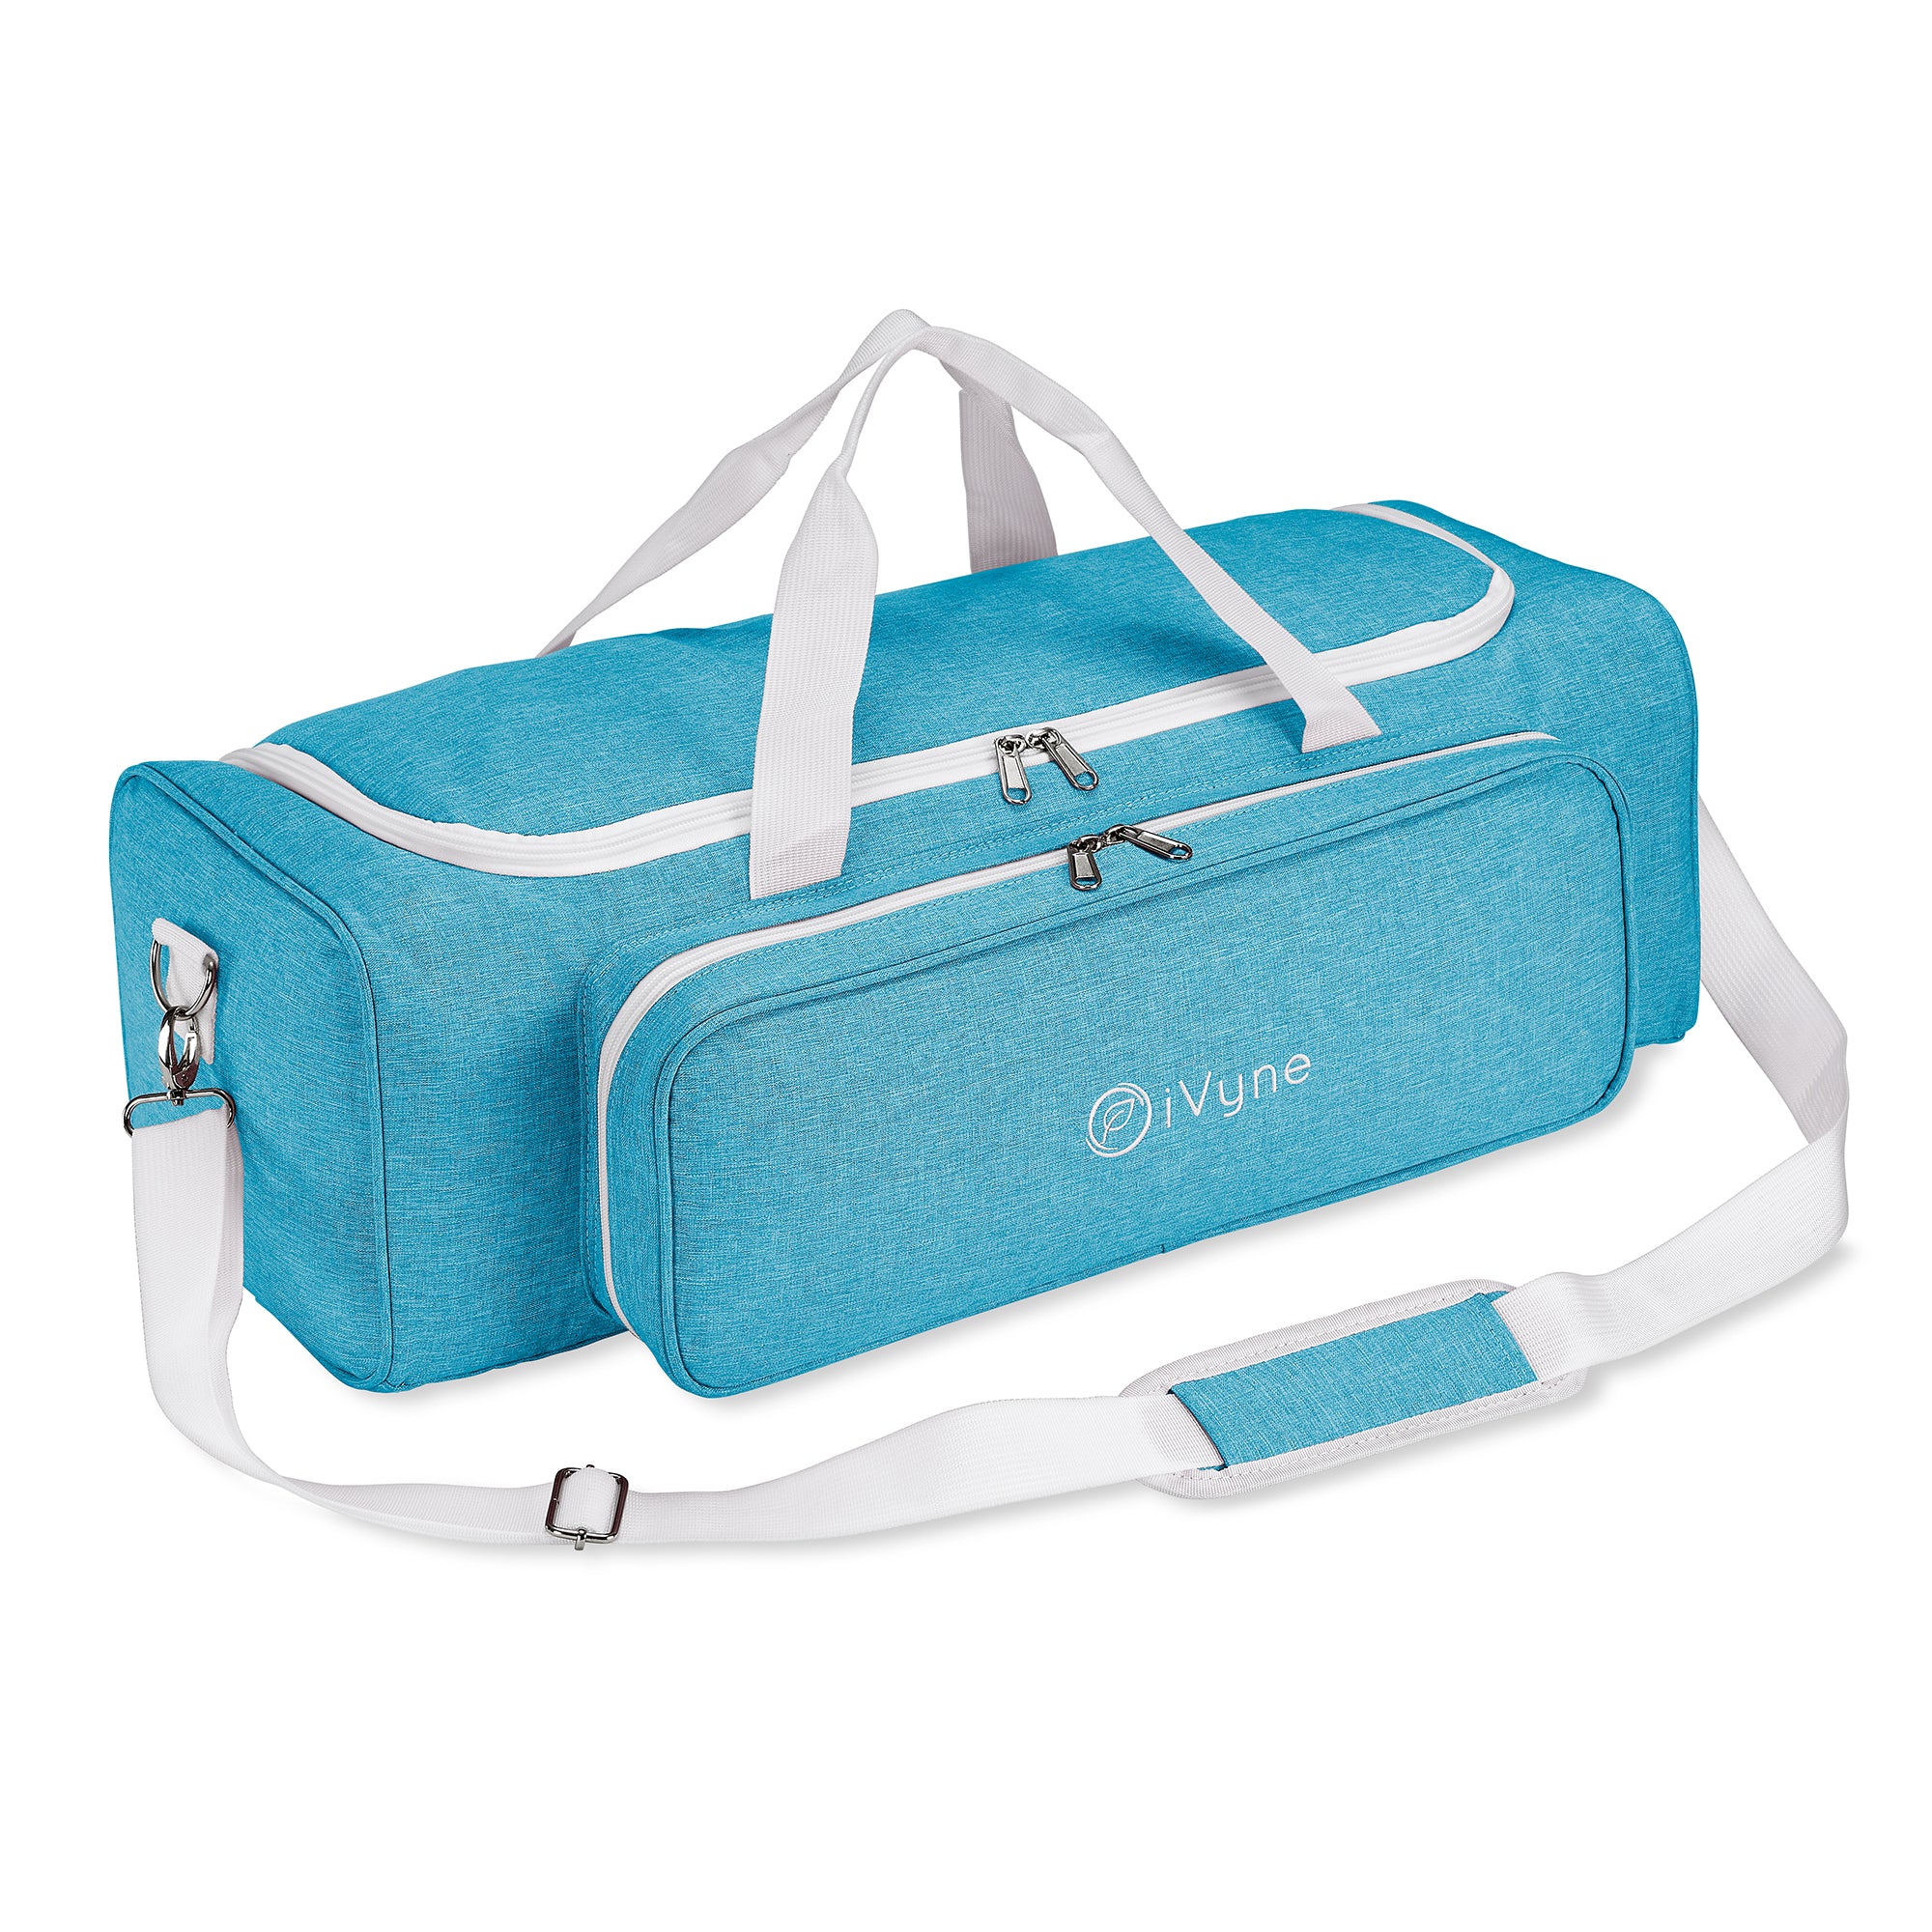 Carrying Case for Cricut Maker 3/Maker/Explore 3/Explore Air 2, Bag Only  With